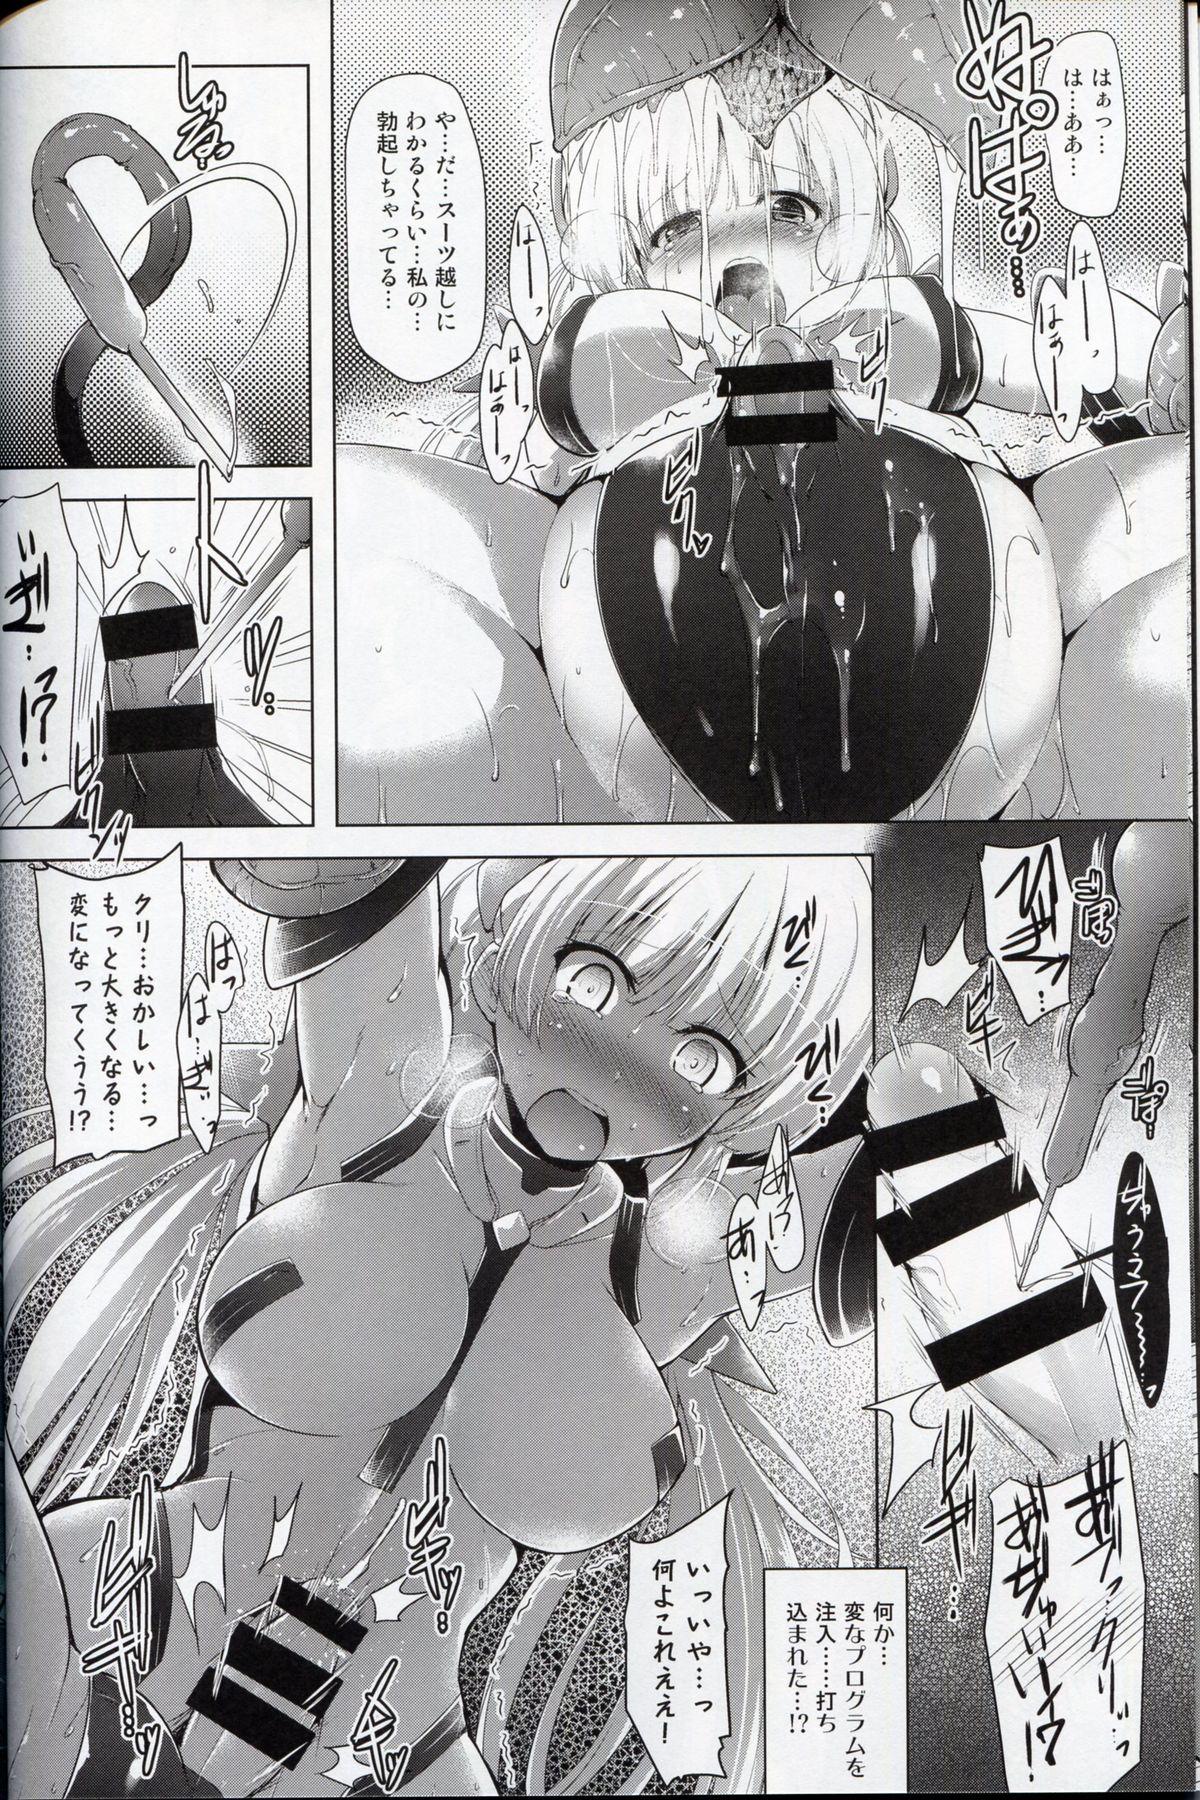 Comedor K.231 - Expelled from paradise Whatsapp - Page 7